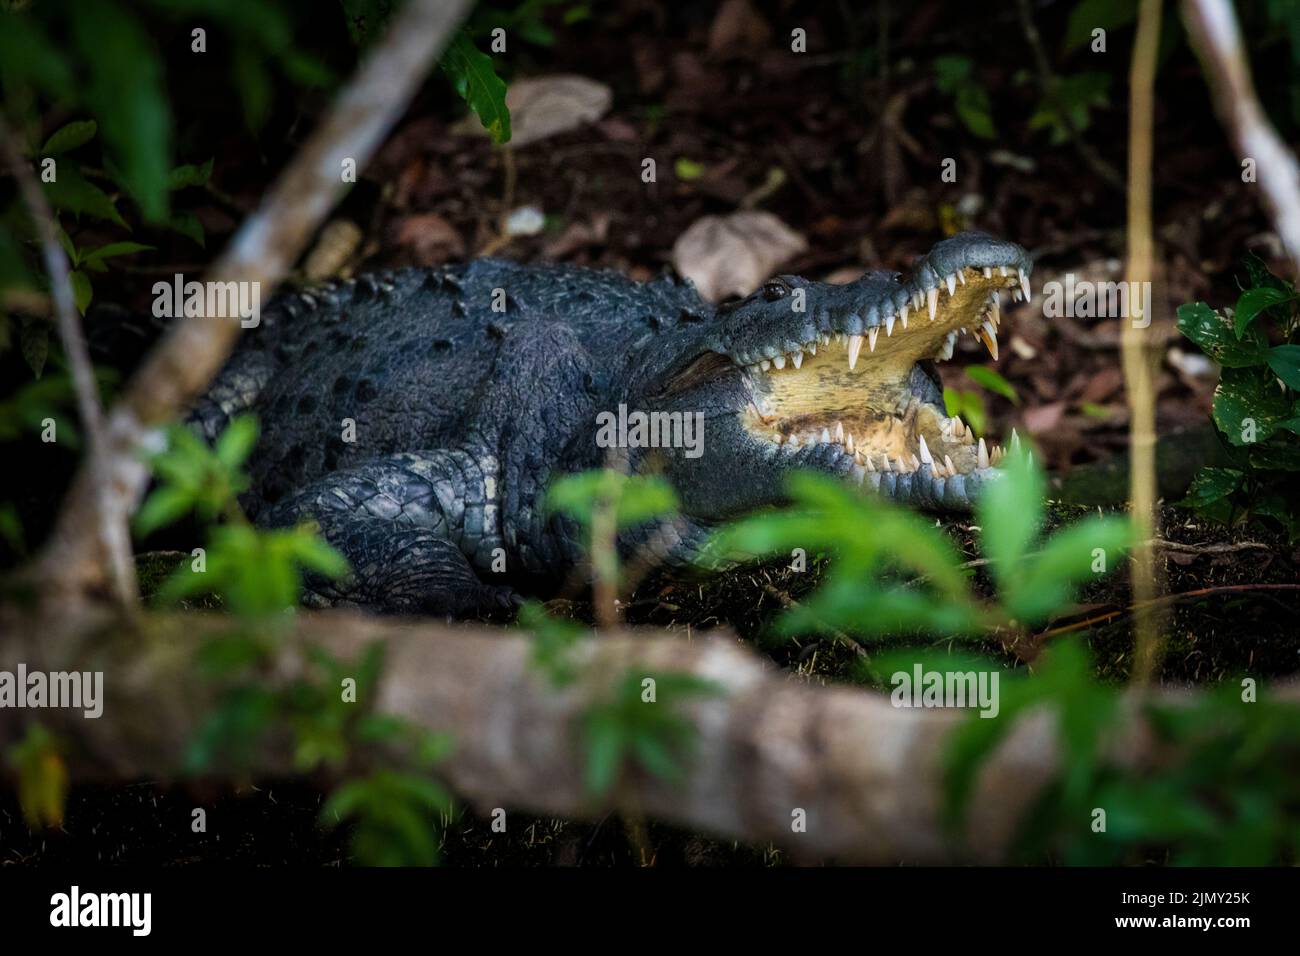 A large american crocodile, Crocodylus acutus, lying in the forest beside Rio Chagres, Soberania national park, Republic of Panama, Central America. Stock Photo